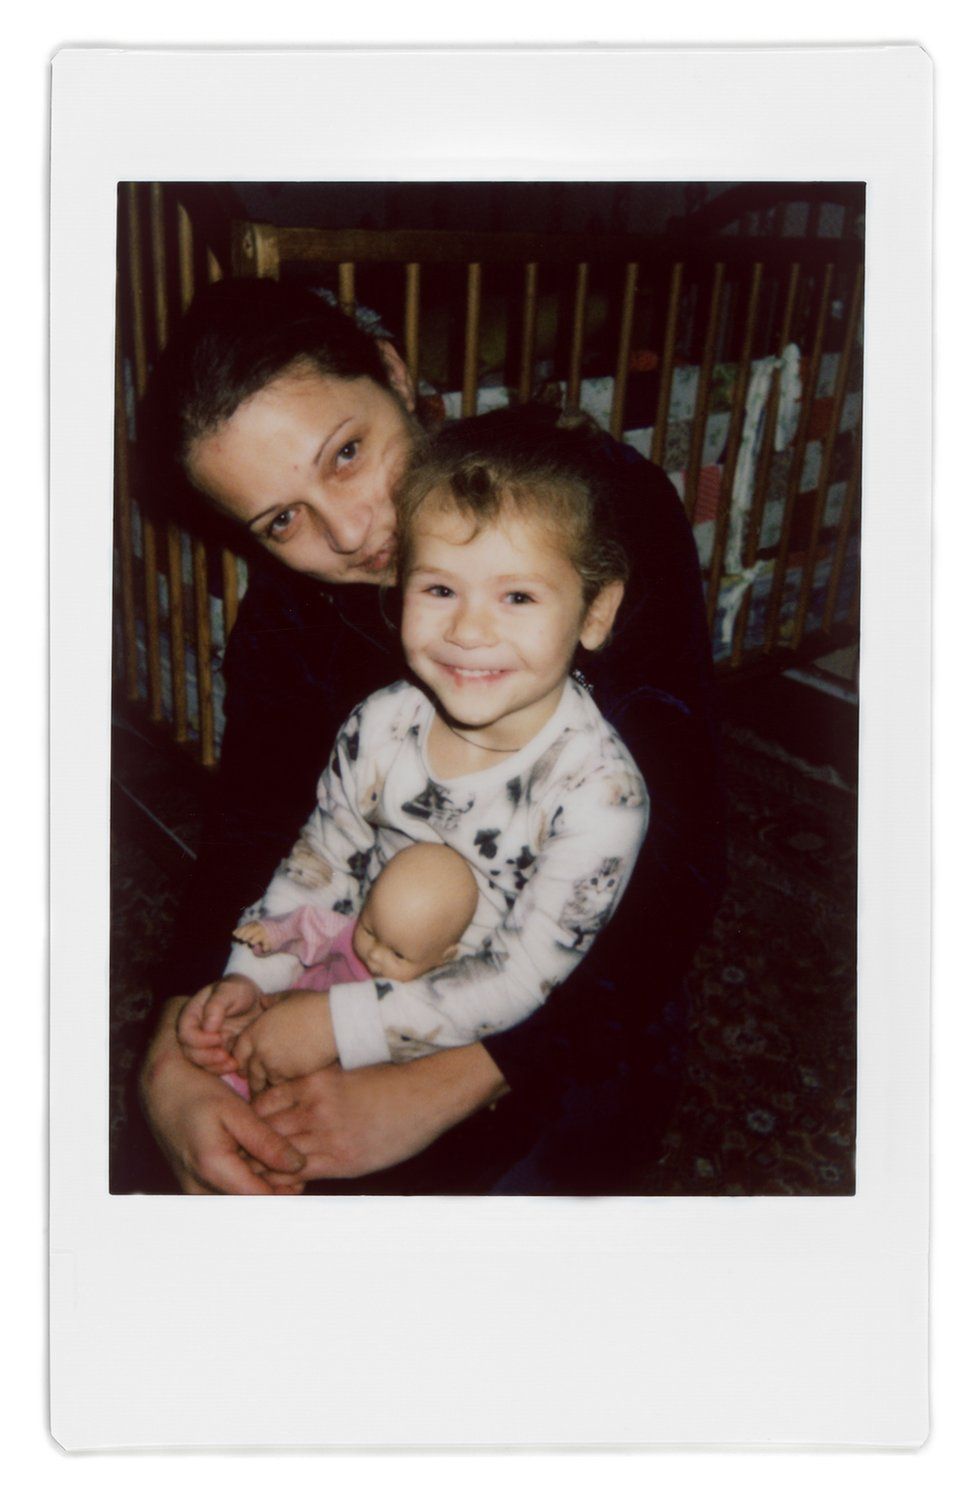 A polaroid photo of Ana and her daughter